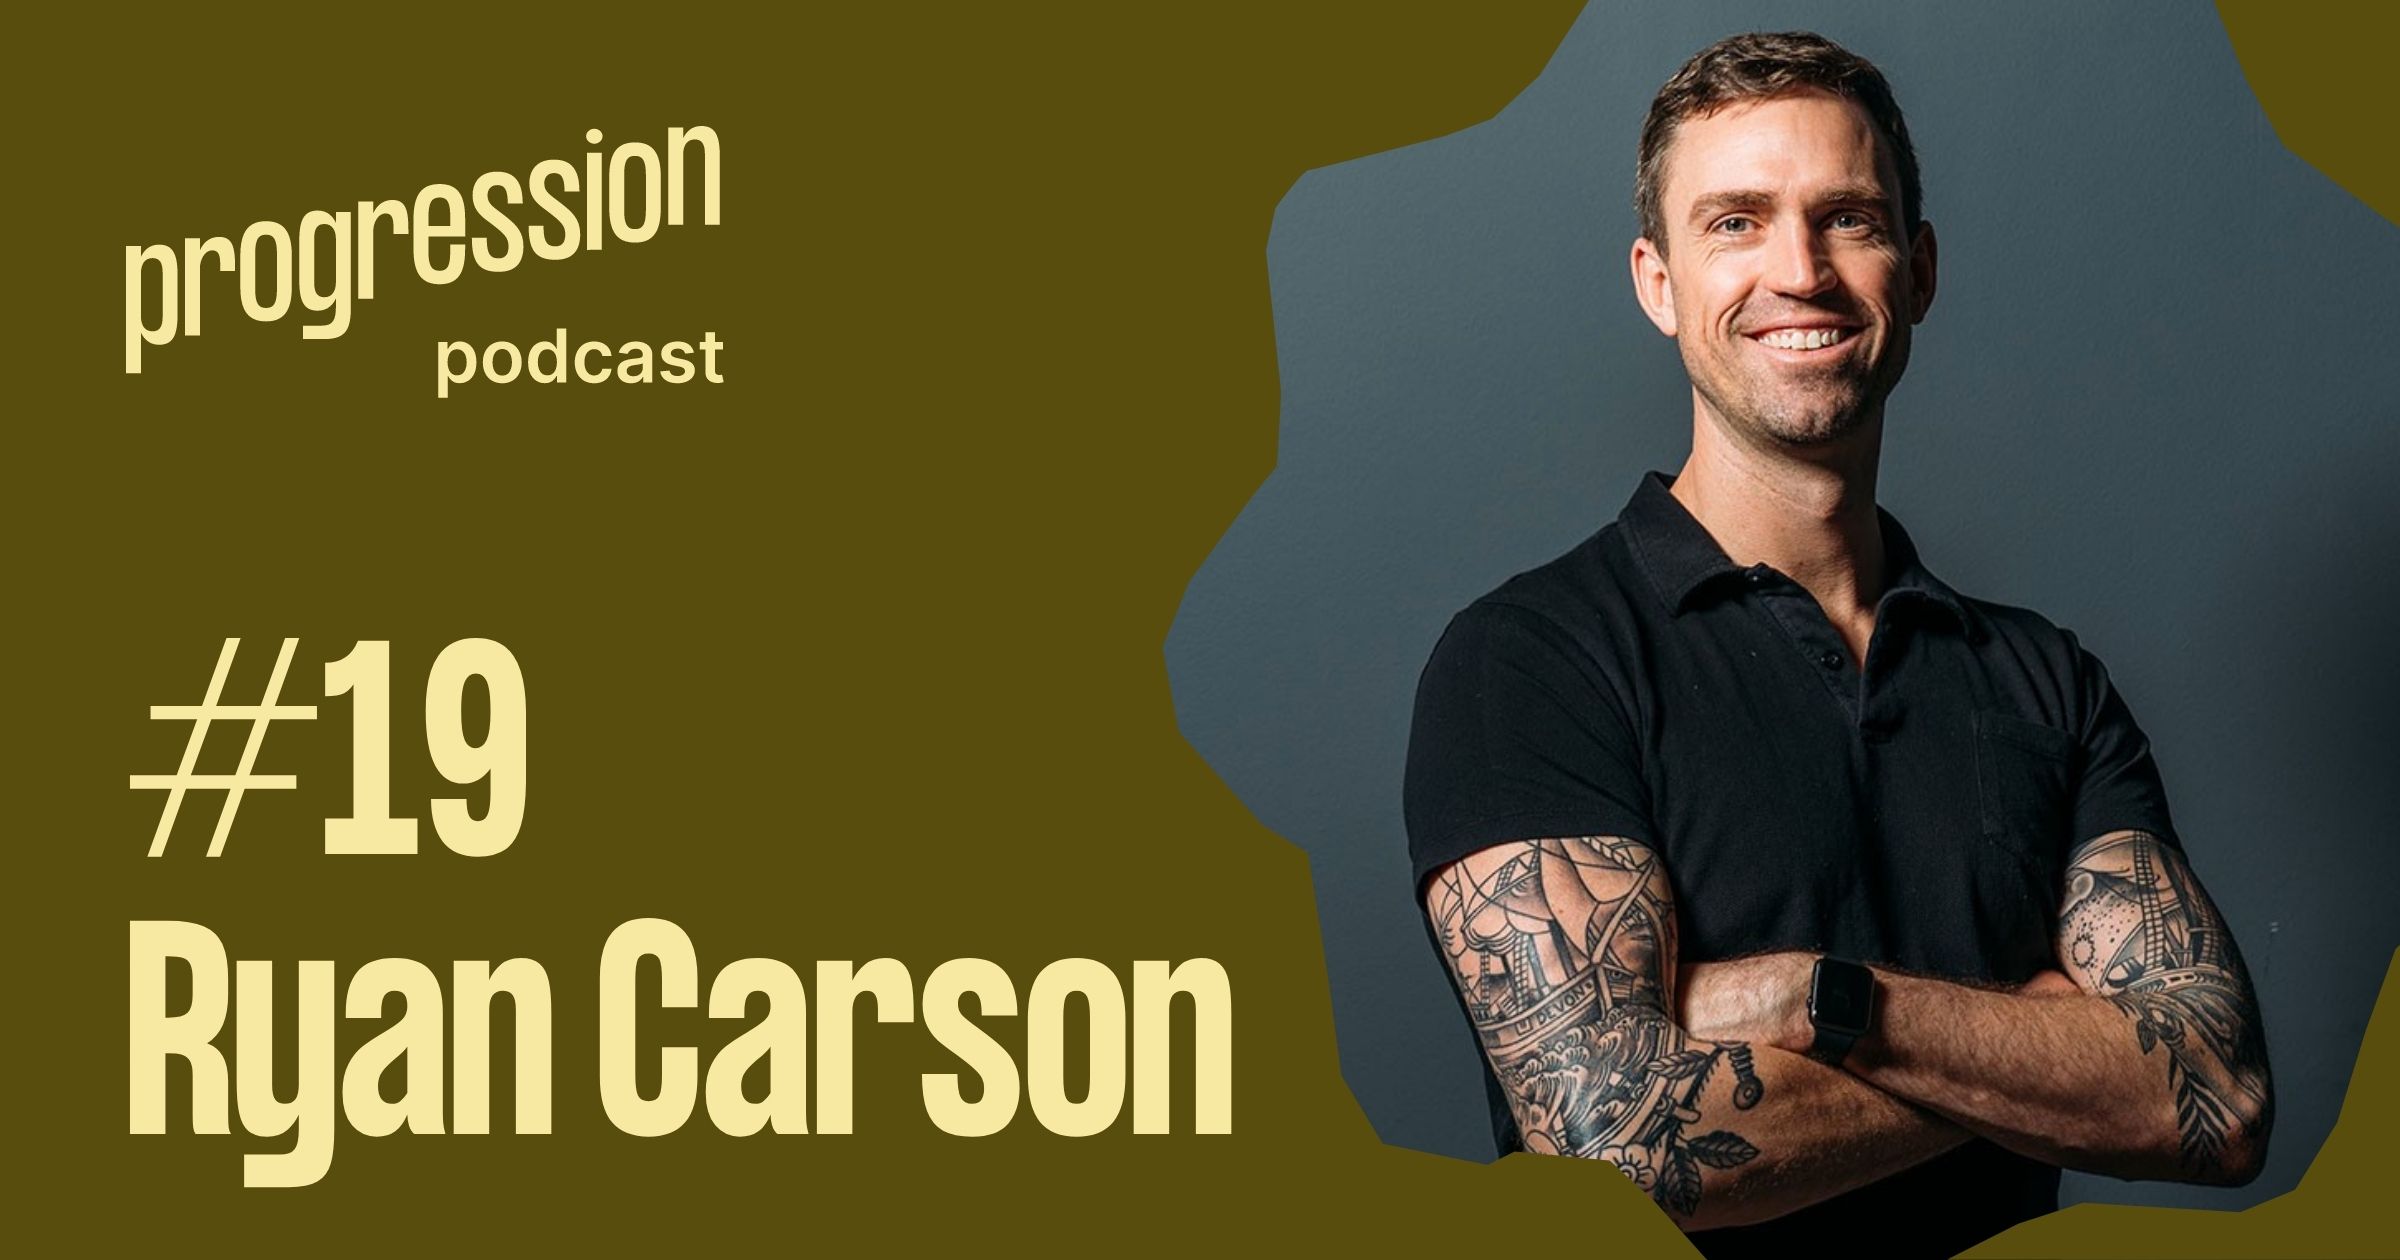 Podcast #19: Ryan Carson (CEO, Treehouse) on a winding journey to training 100,000 new software engineers